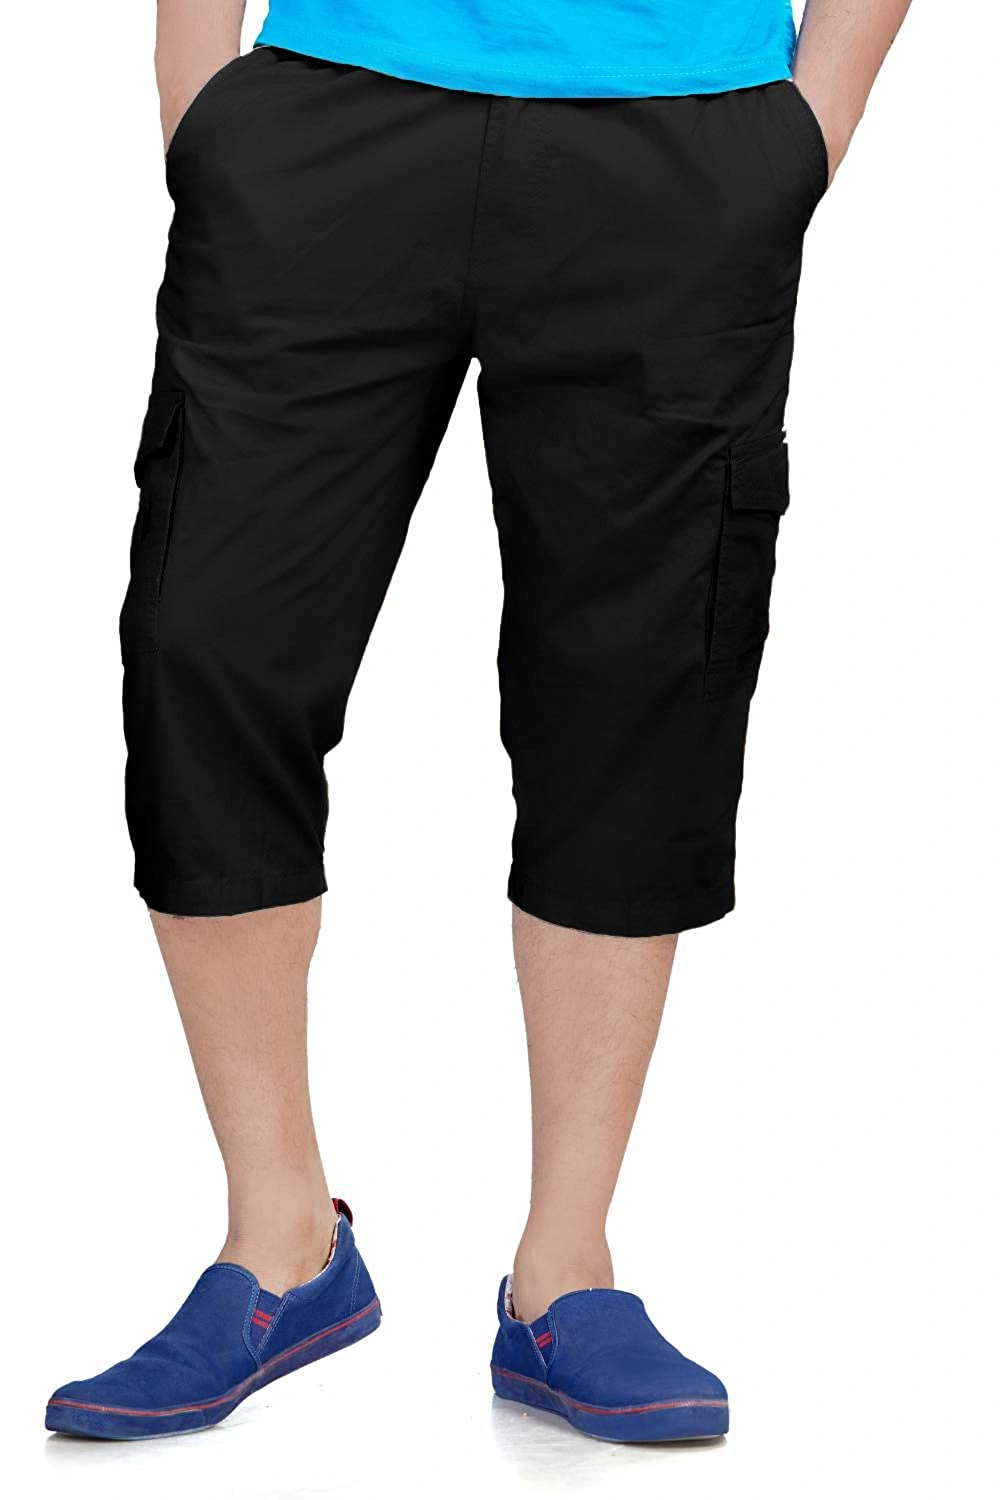 Dickies 3 Quarter Black Pants (Relaxed Fit), Men's Fashion, Bottoms,  Trousers on Carousell